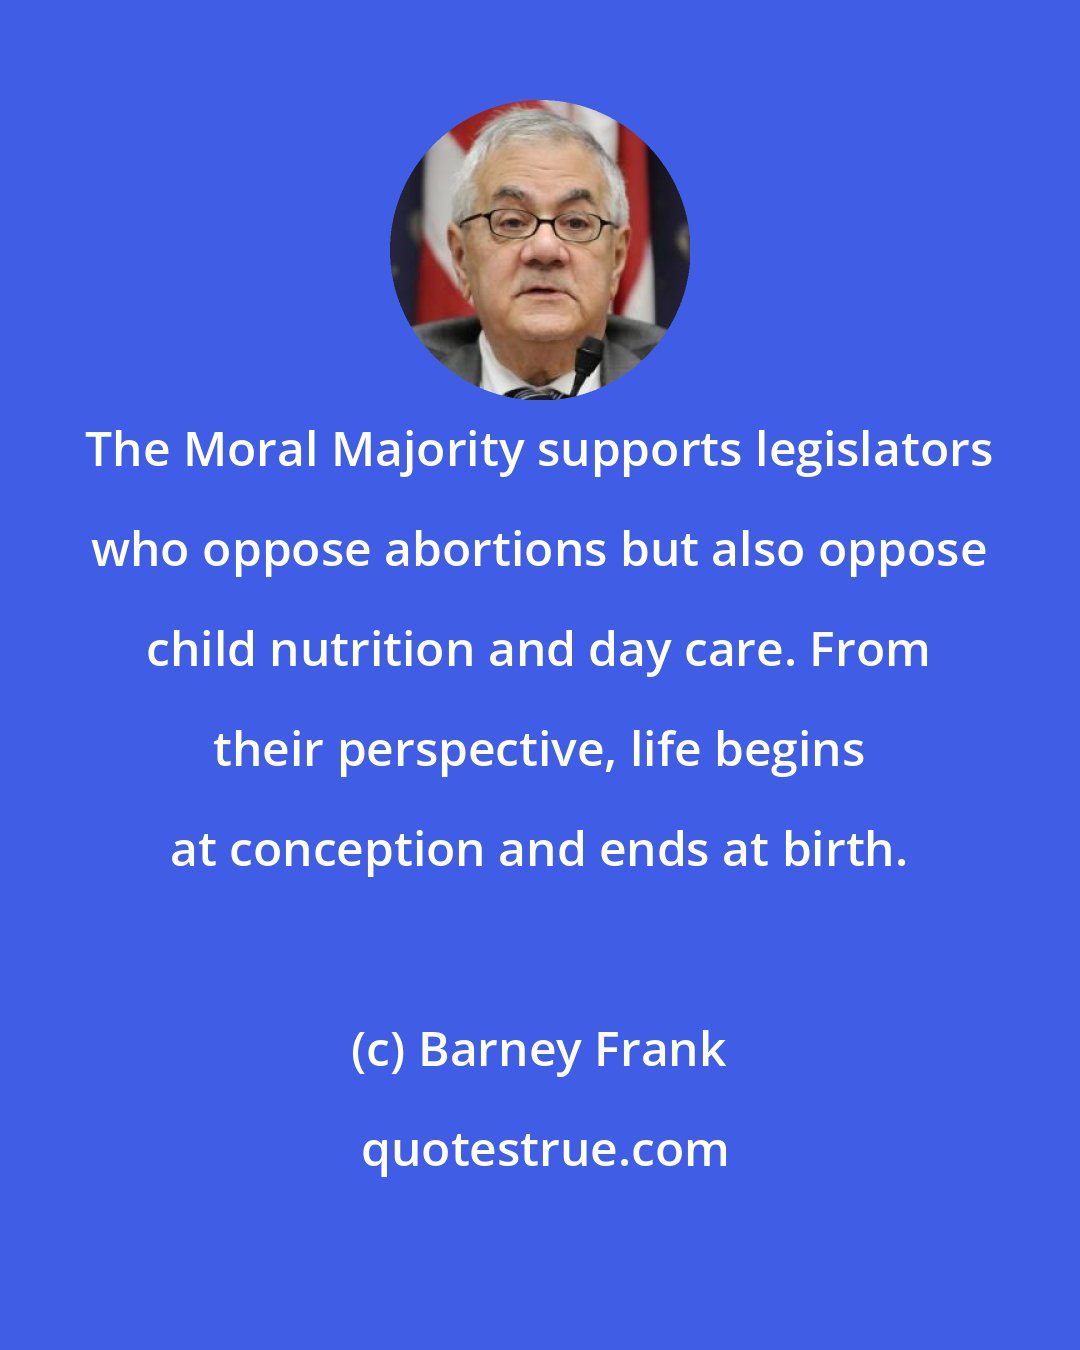 Barney Frank: The Moral Majority supports legislators who oppose abortions but also oppose child nutrition and day care. From their perspective, life begins at conception and ends at birth.